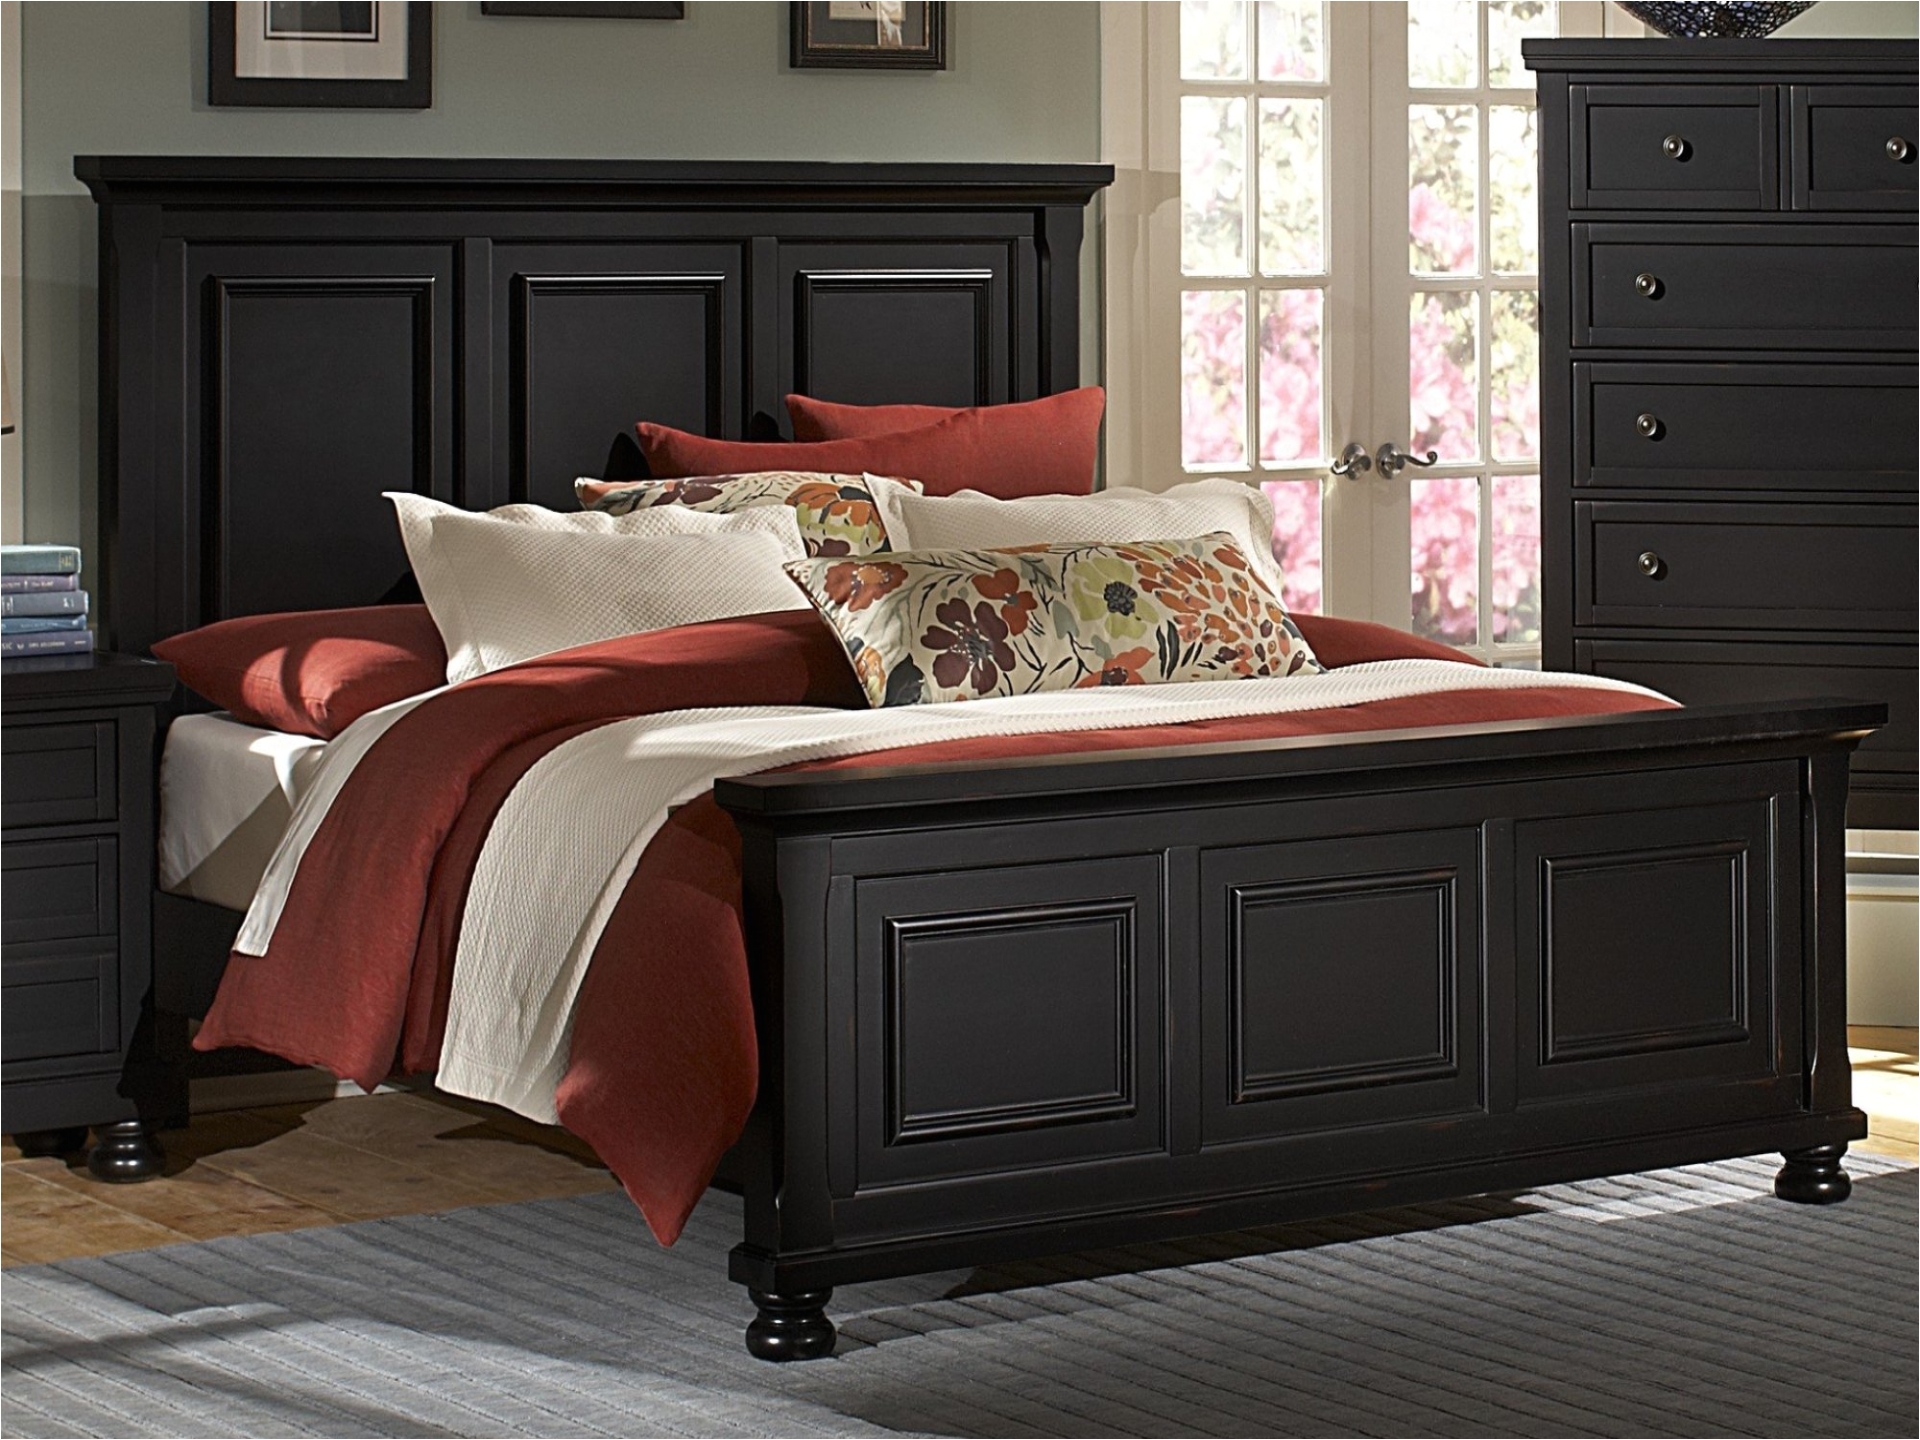 furniture outlet bett direct locations lane vintage bedroom labor day weekend s when does have discontinued